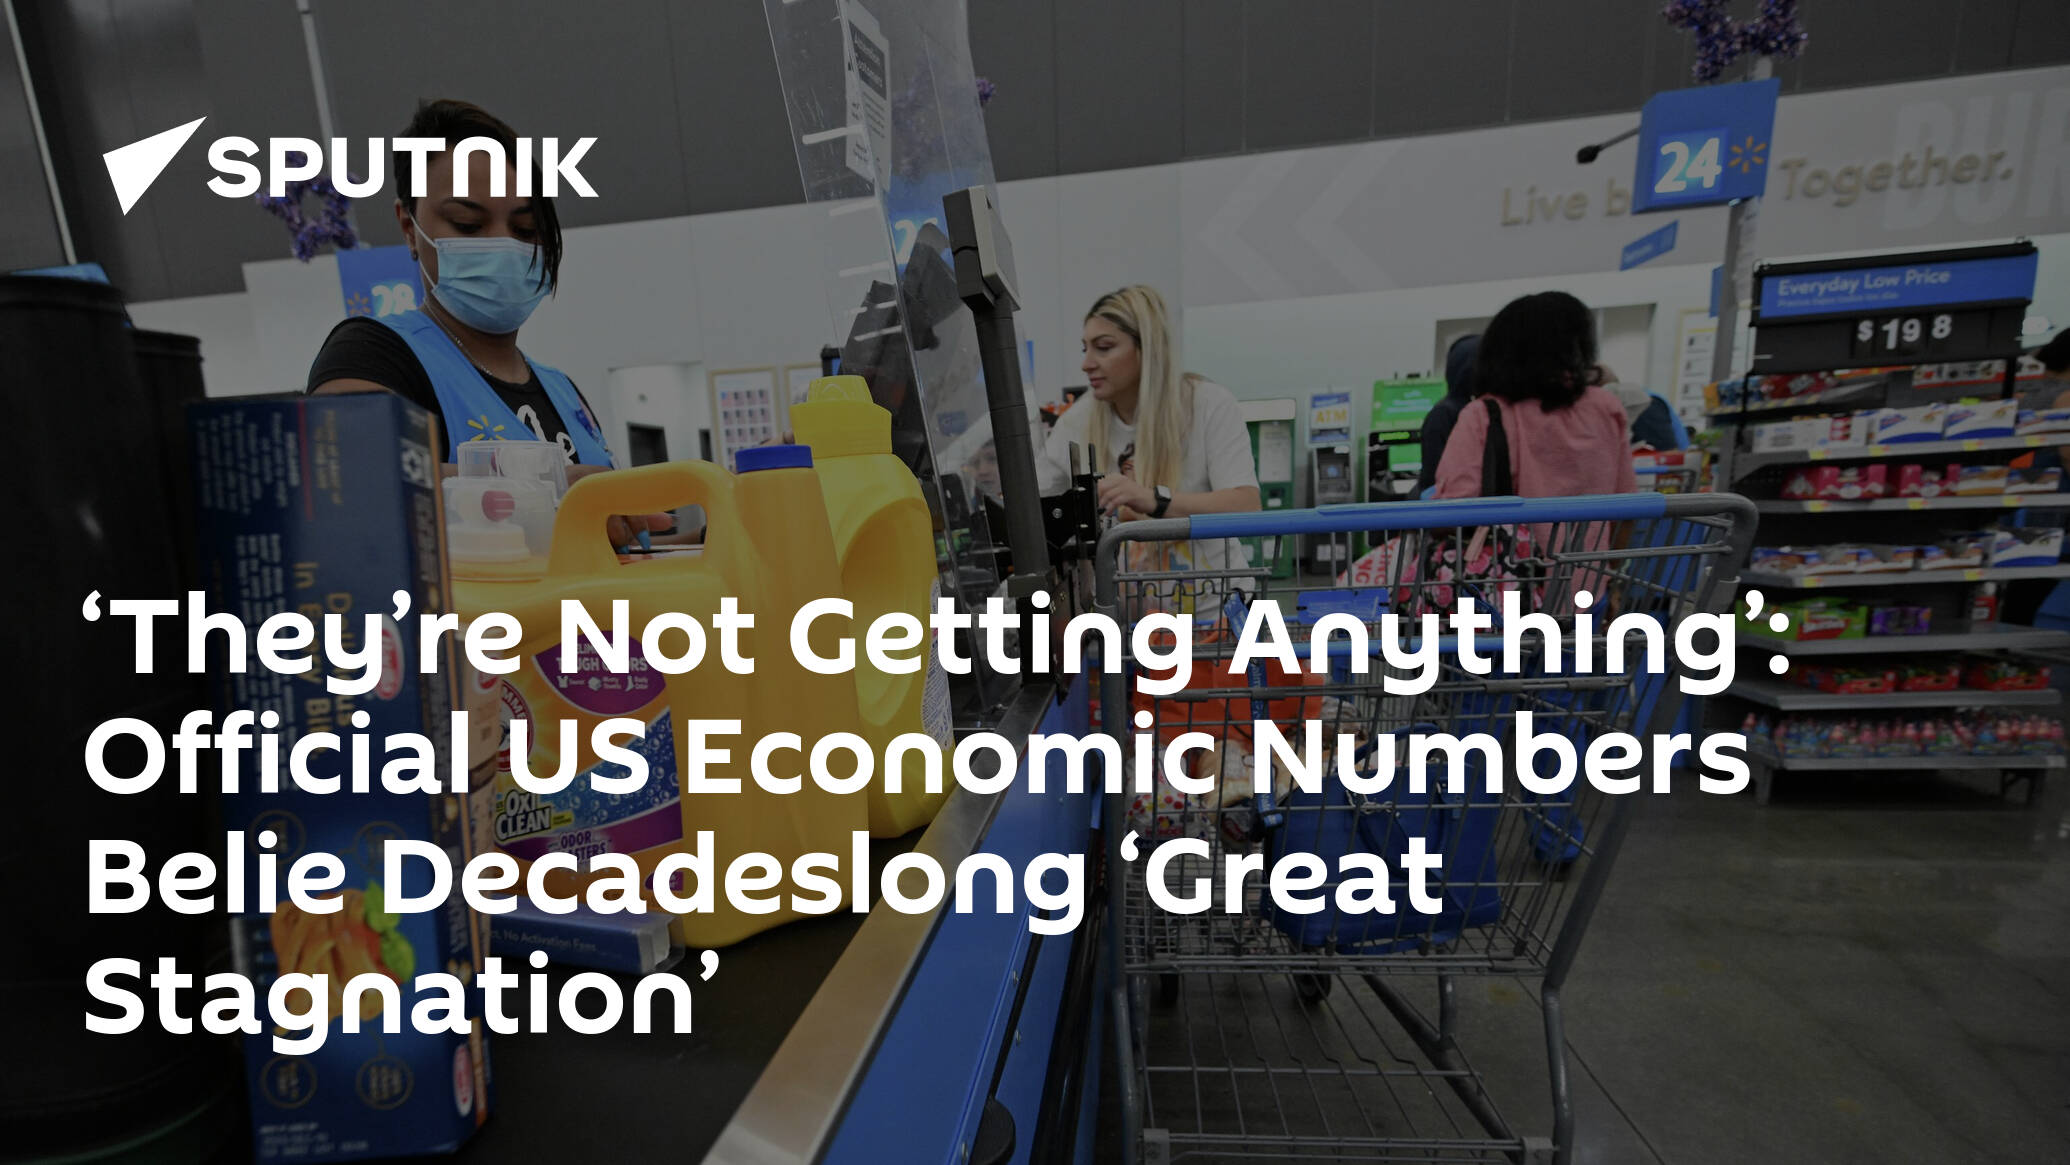 ‘They’re Not Getting Anything’: Official US Economic Numbers Belie Decadeslong ‘Great Stagnation’